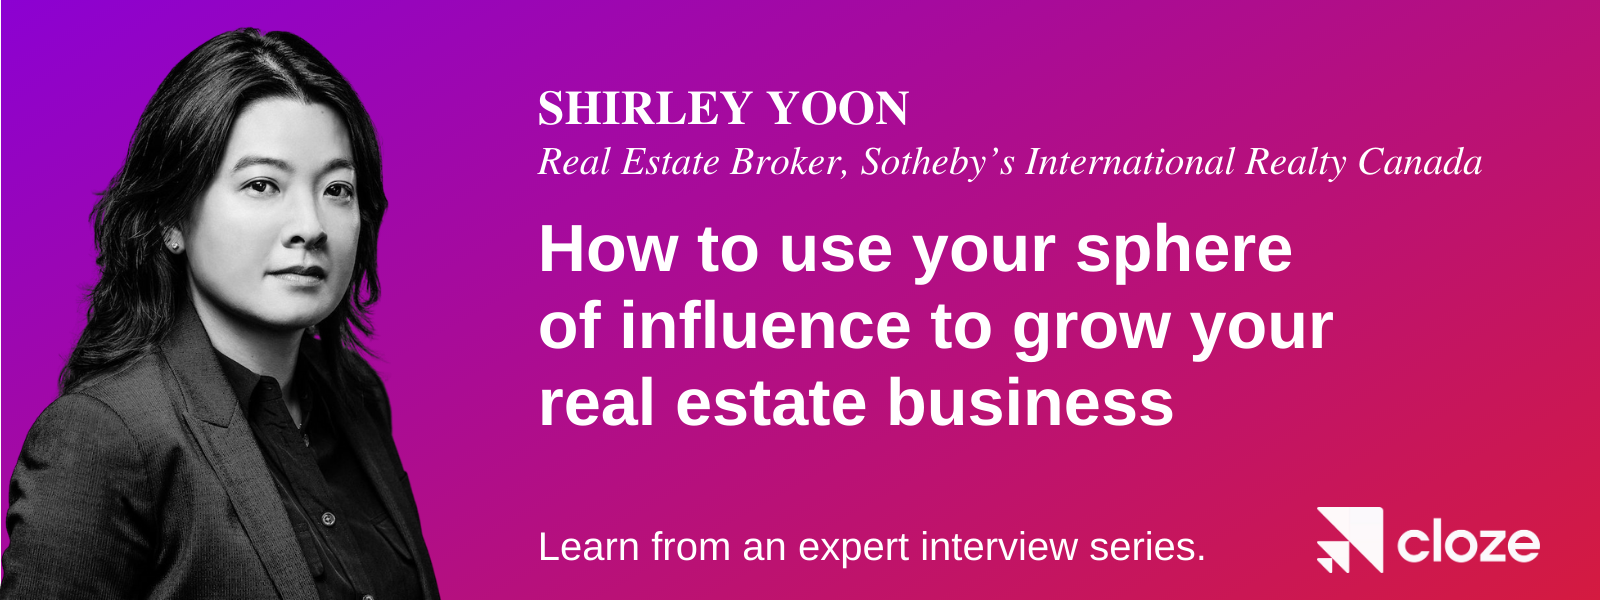 How to use your sphere of influence to grow your real estate business. An interview with Shirley Yoon.